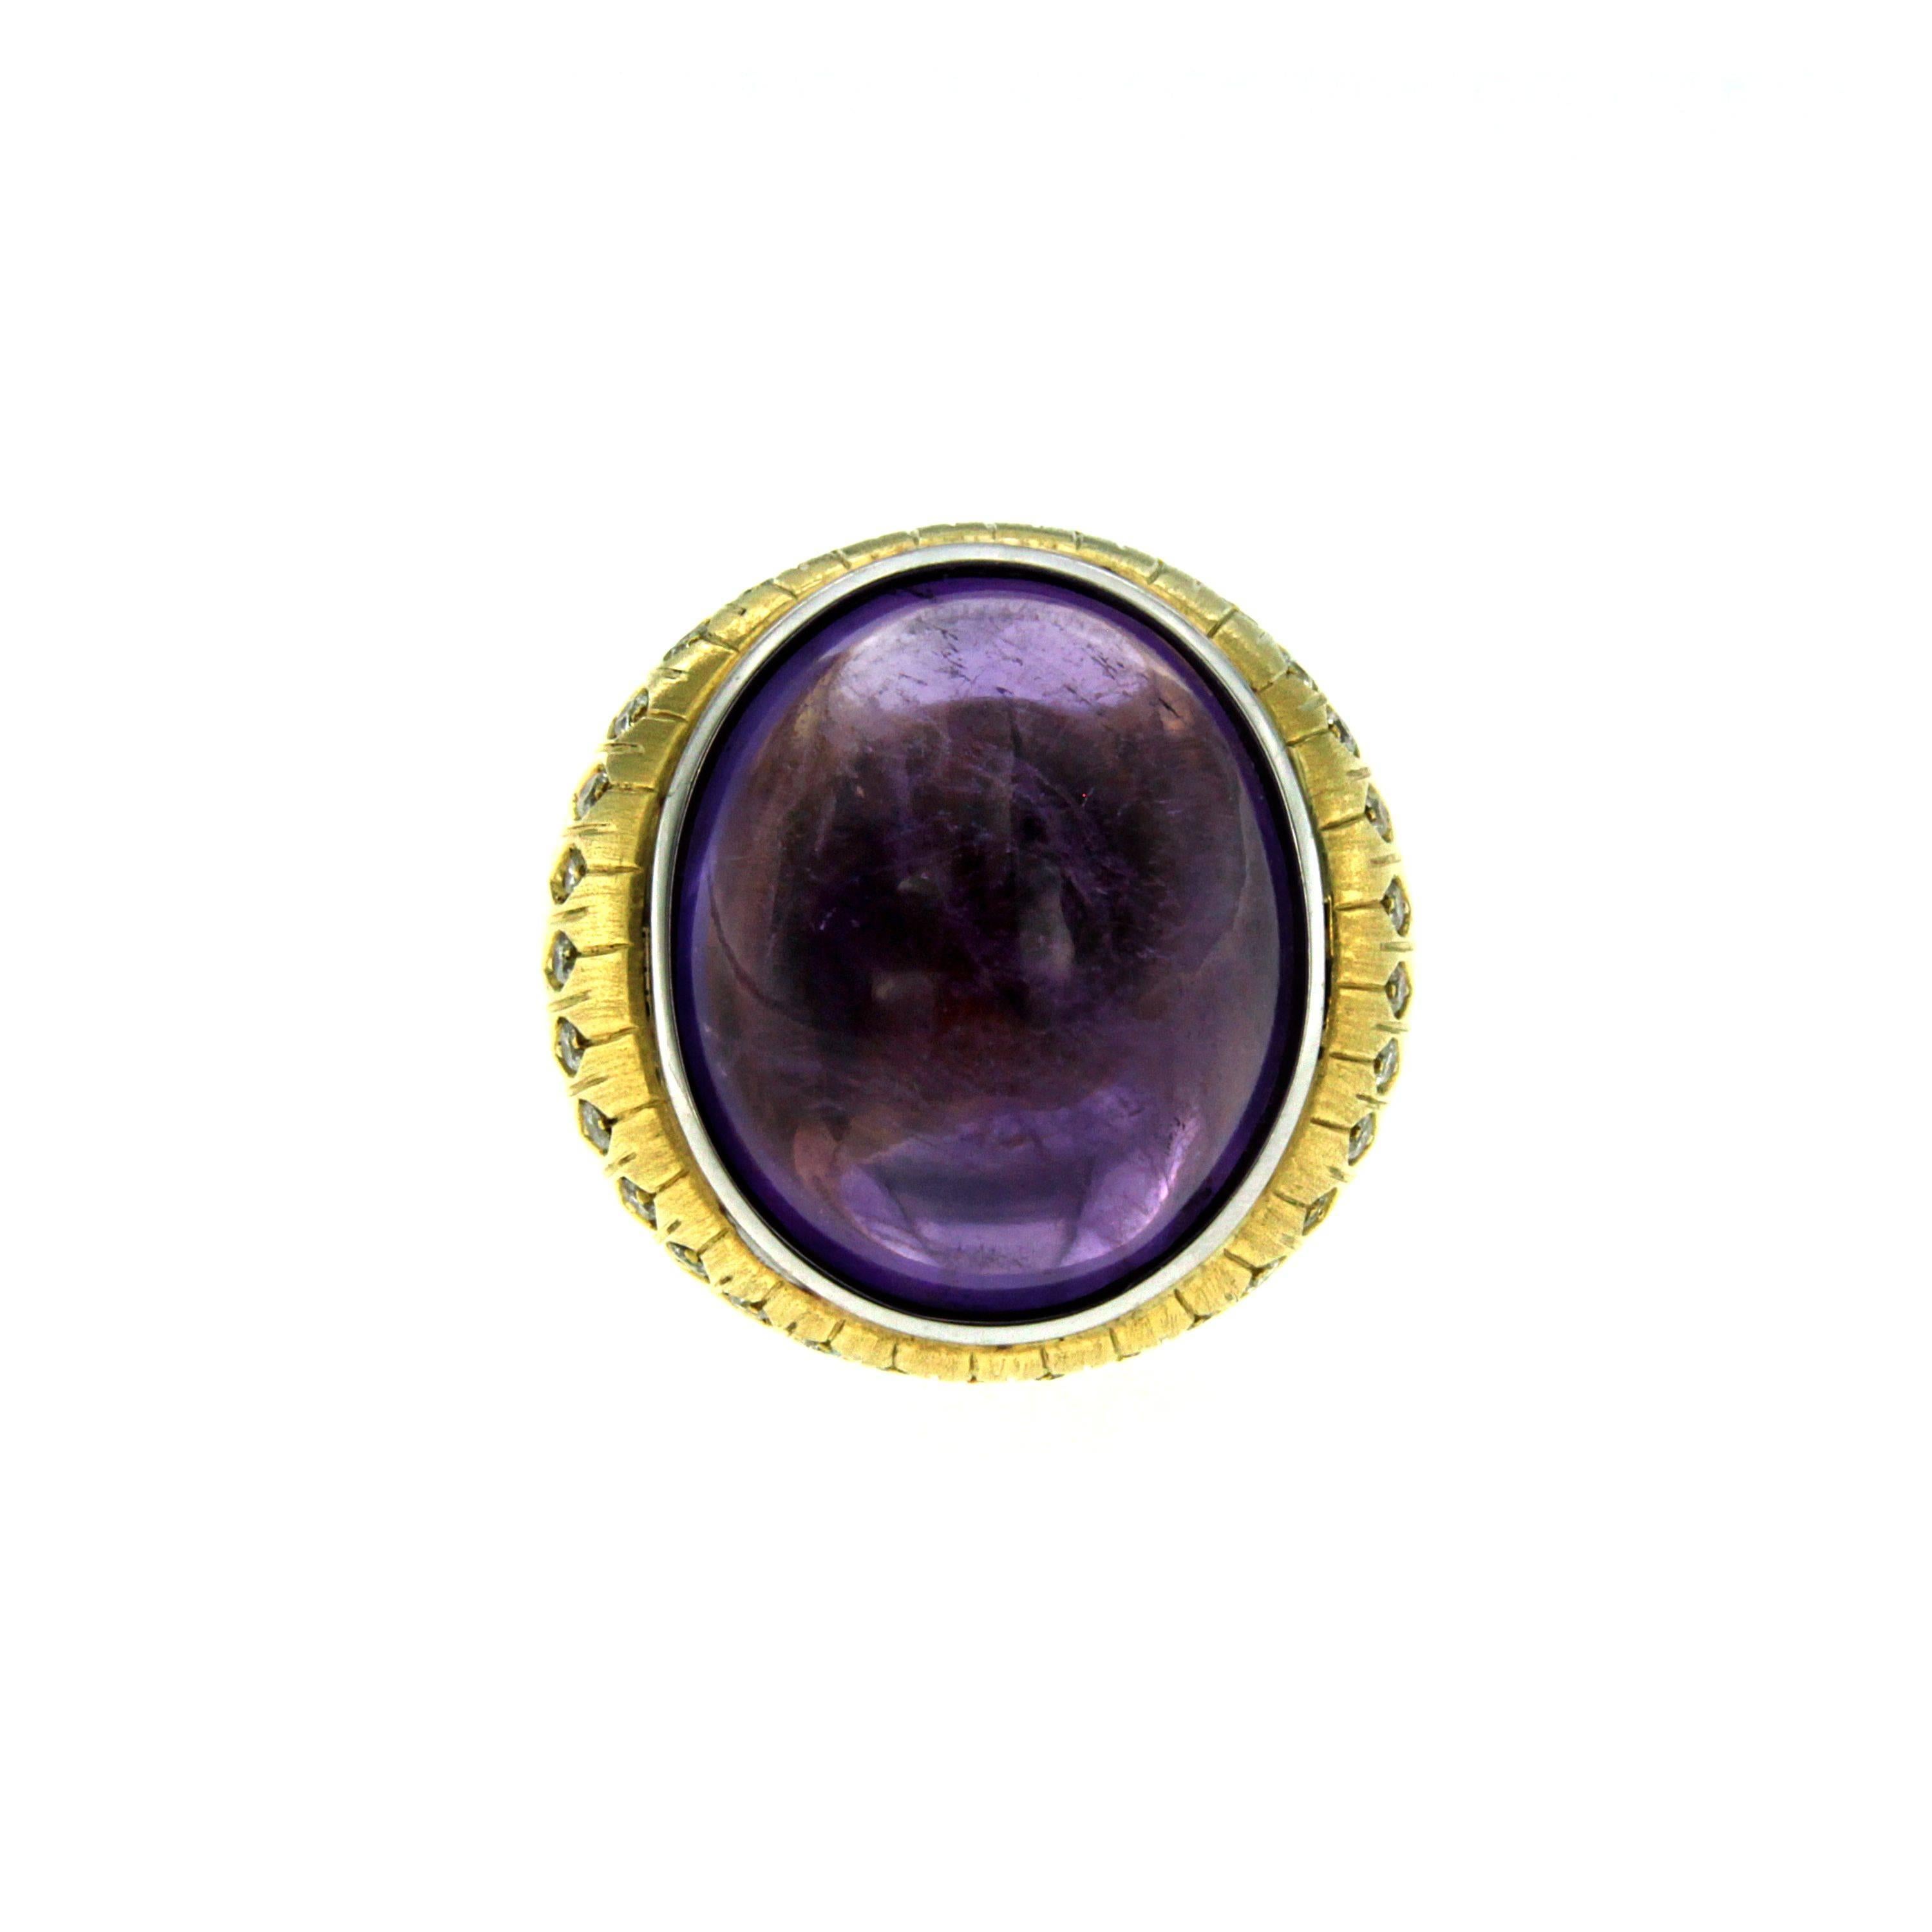 Beautuful unisex ring mounted in 18k yellow Gold, featururing engraved shoulders and a central natural and large Amethyst weighing 40 carats framed by 1 cts of diamonds. Hallmarked 816 Roma - Oregiani
Circa 1990

CONDITION: Pre Owned -